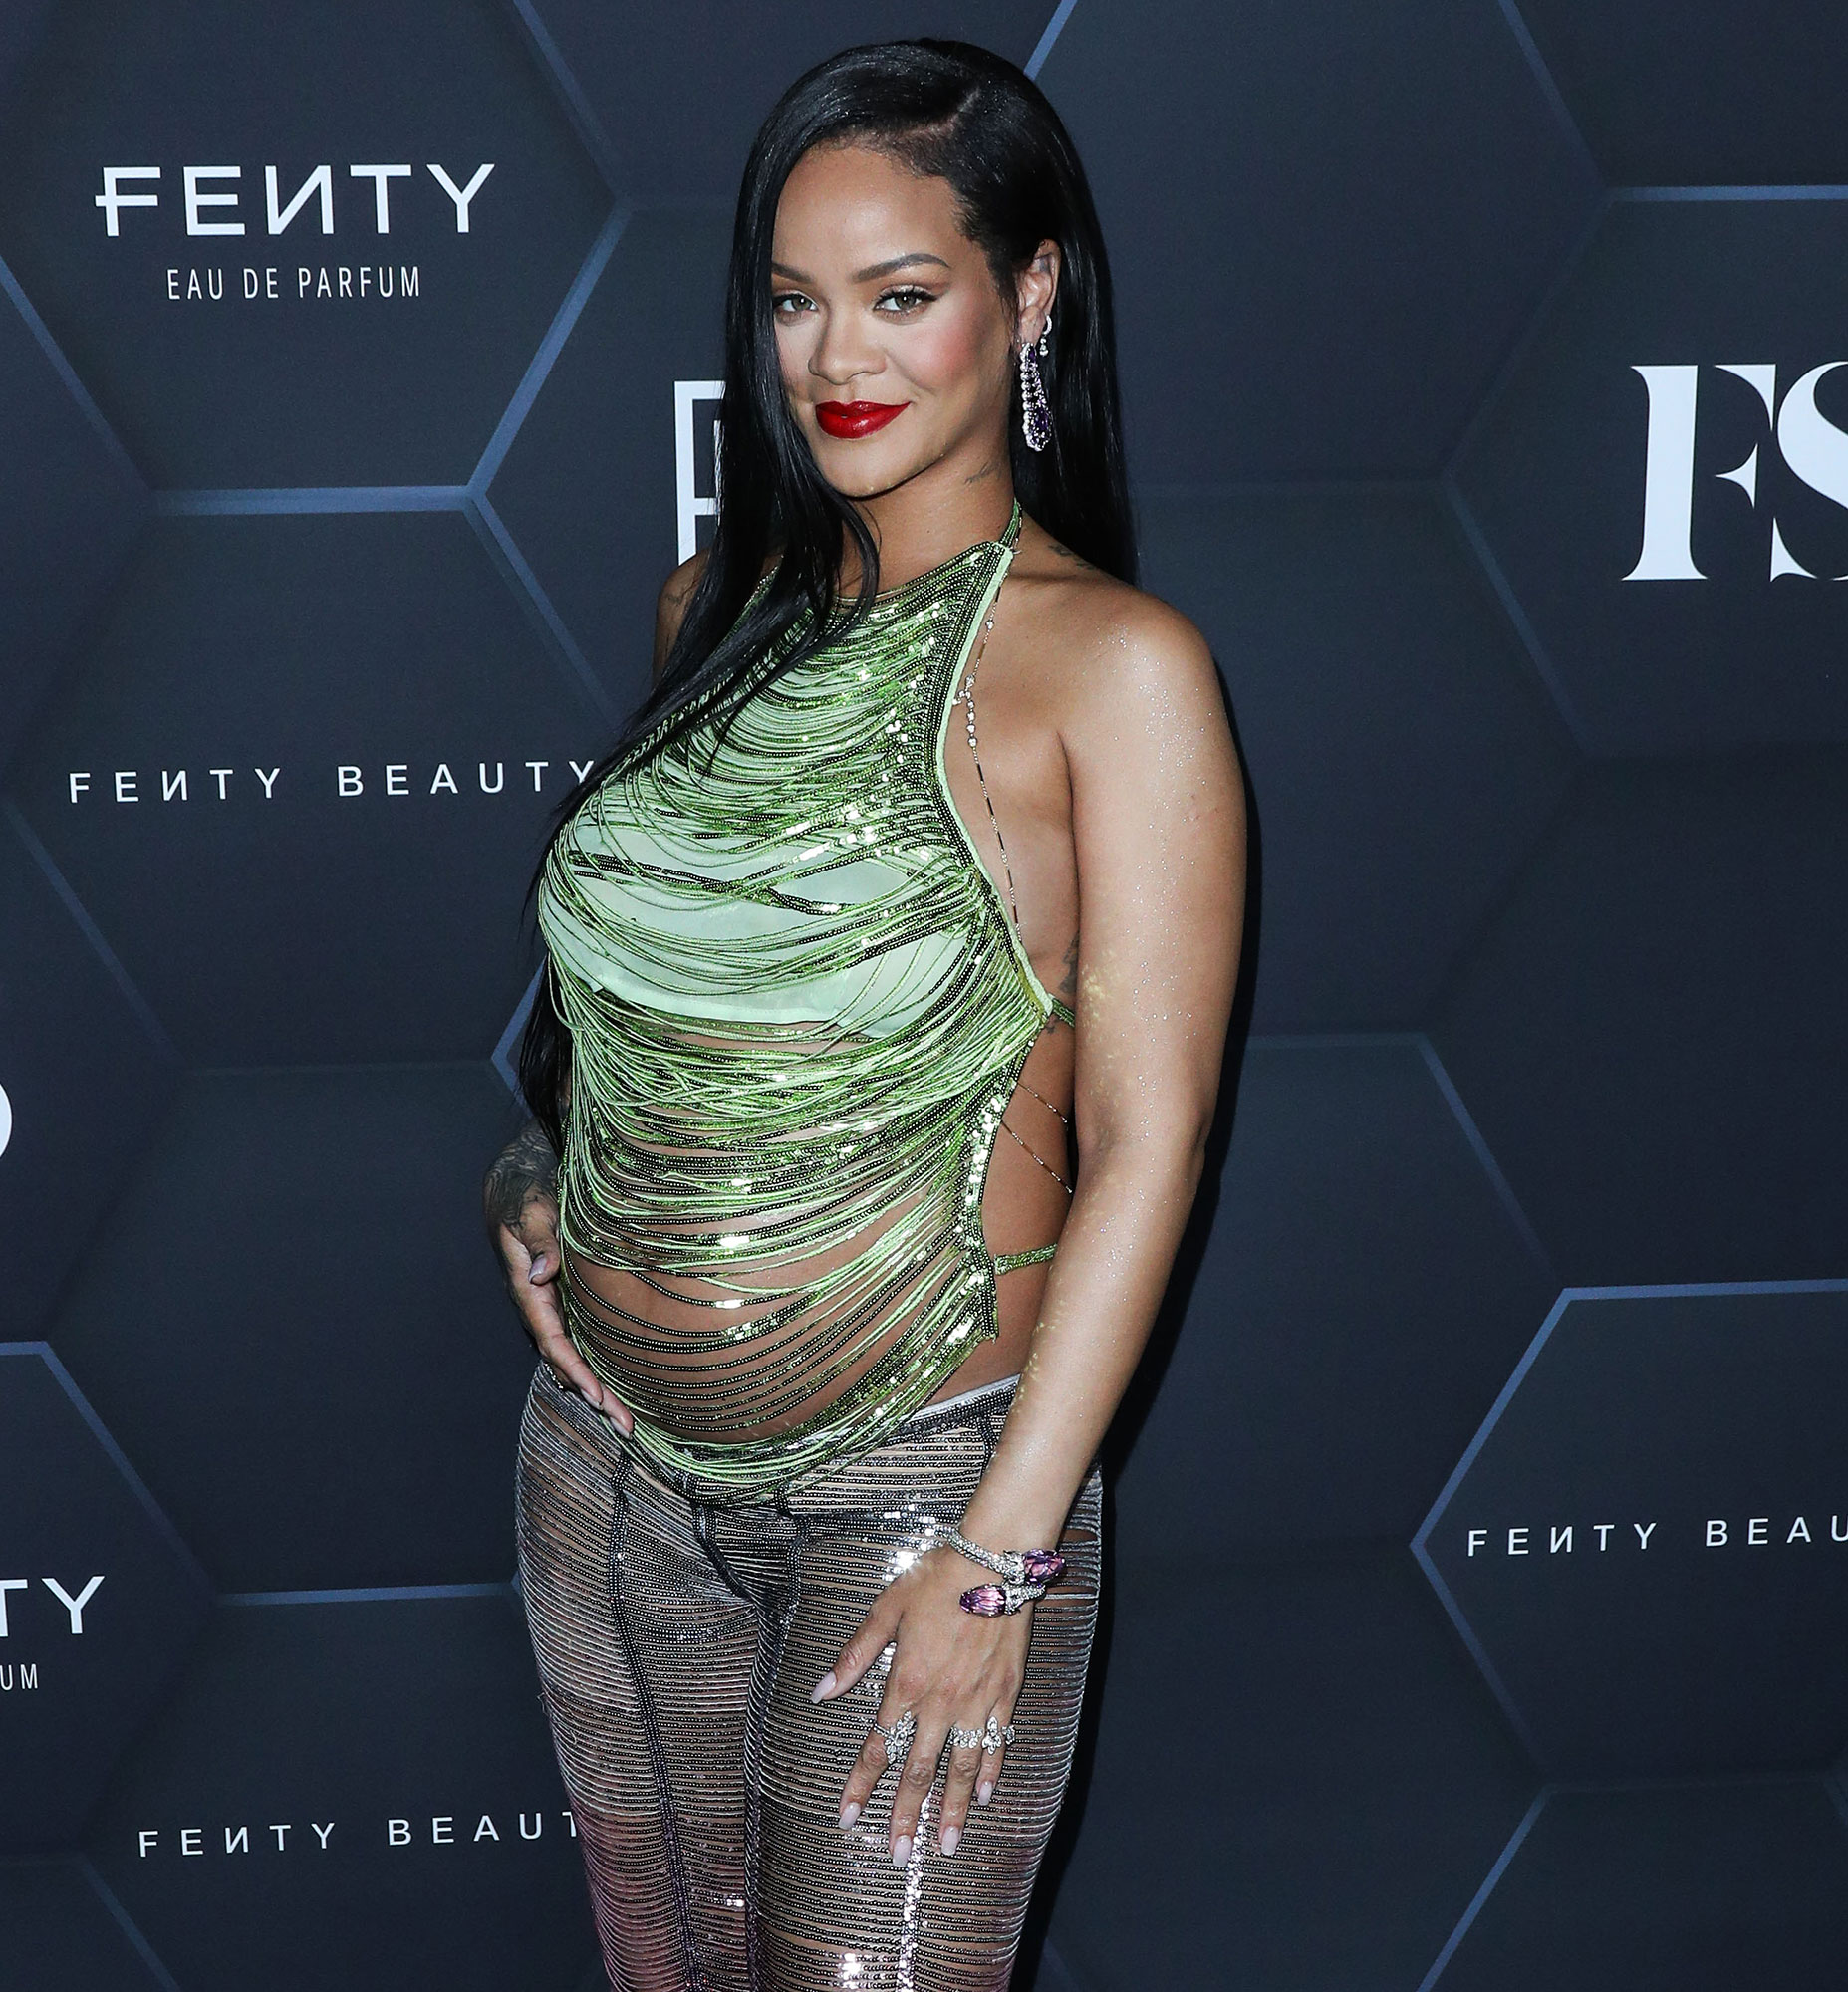 Met Gala 2022 Pregnant Rihanna Honored With Statue Amid Absence